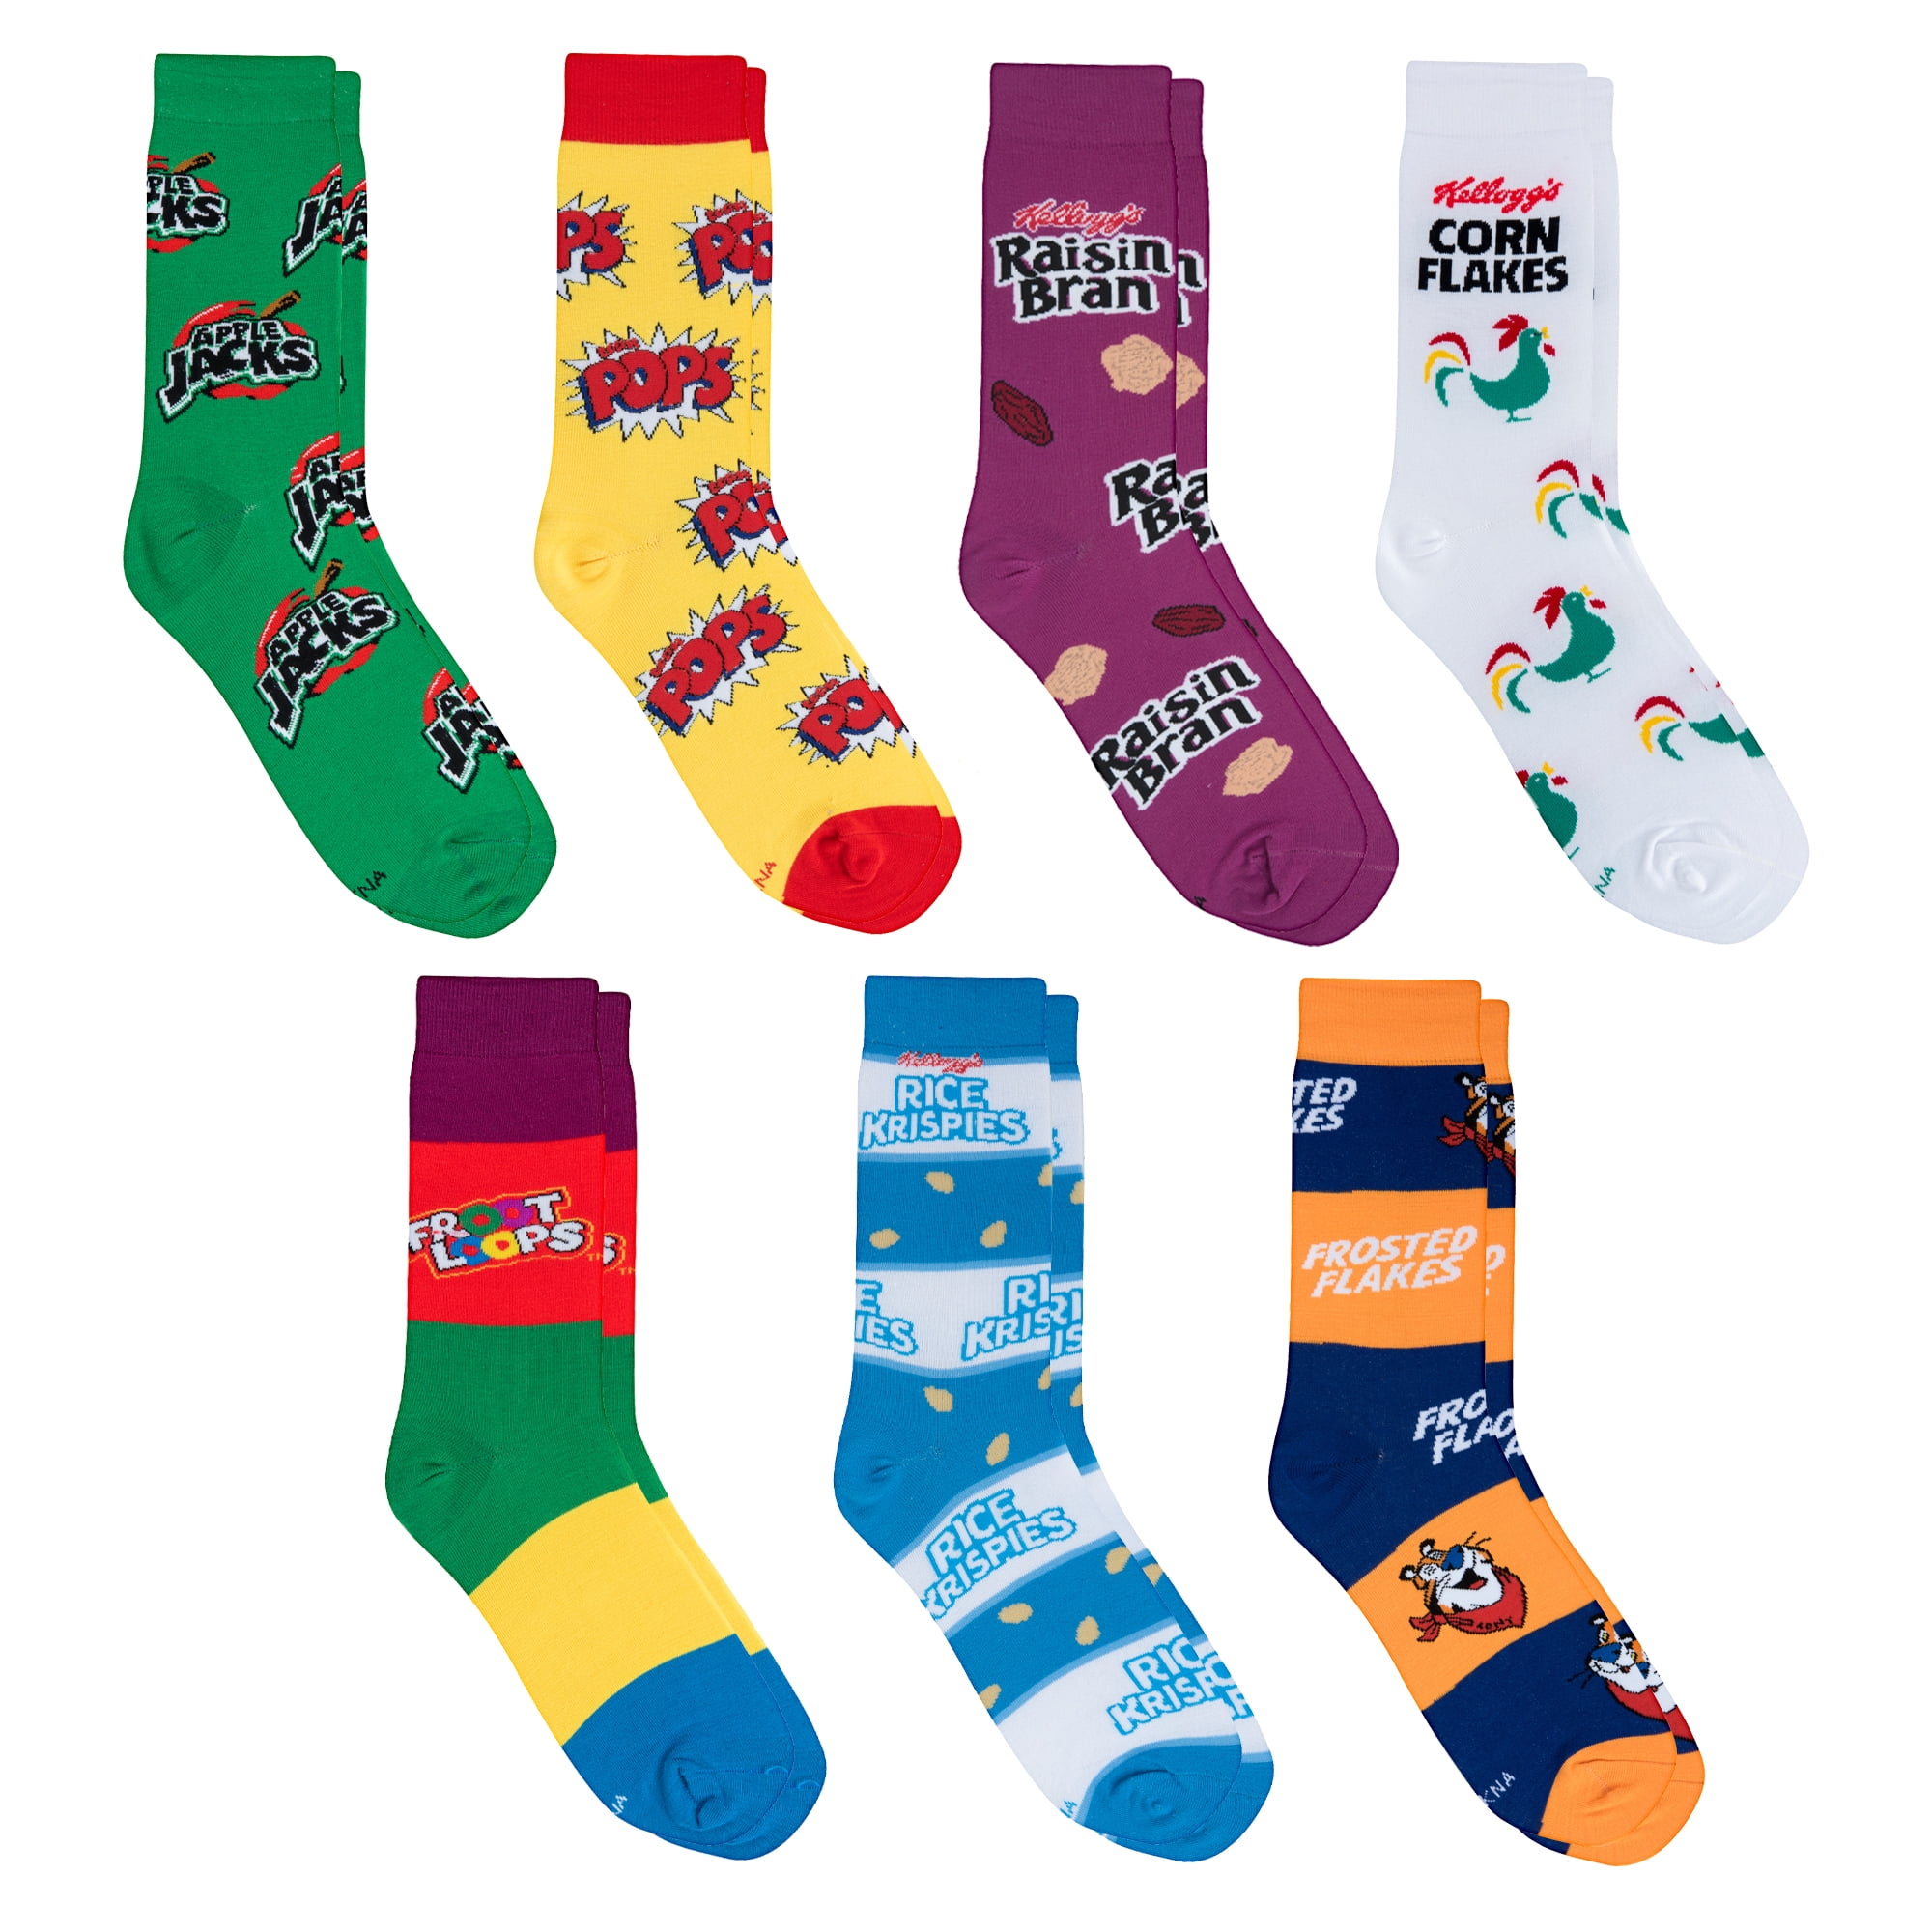 10 Pack Mens Novelty Cute Socks Casual Crazy Fun Funny Bright Patterned Designed Style US size 8 9 10 11 12 13 